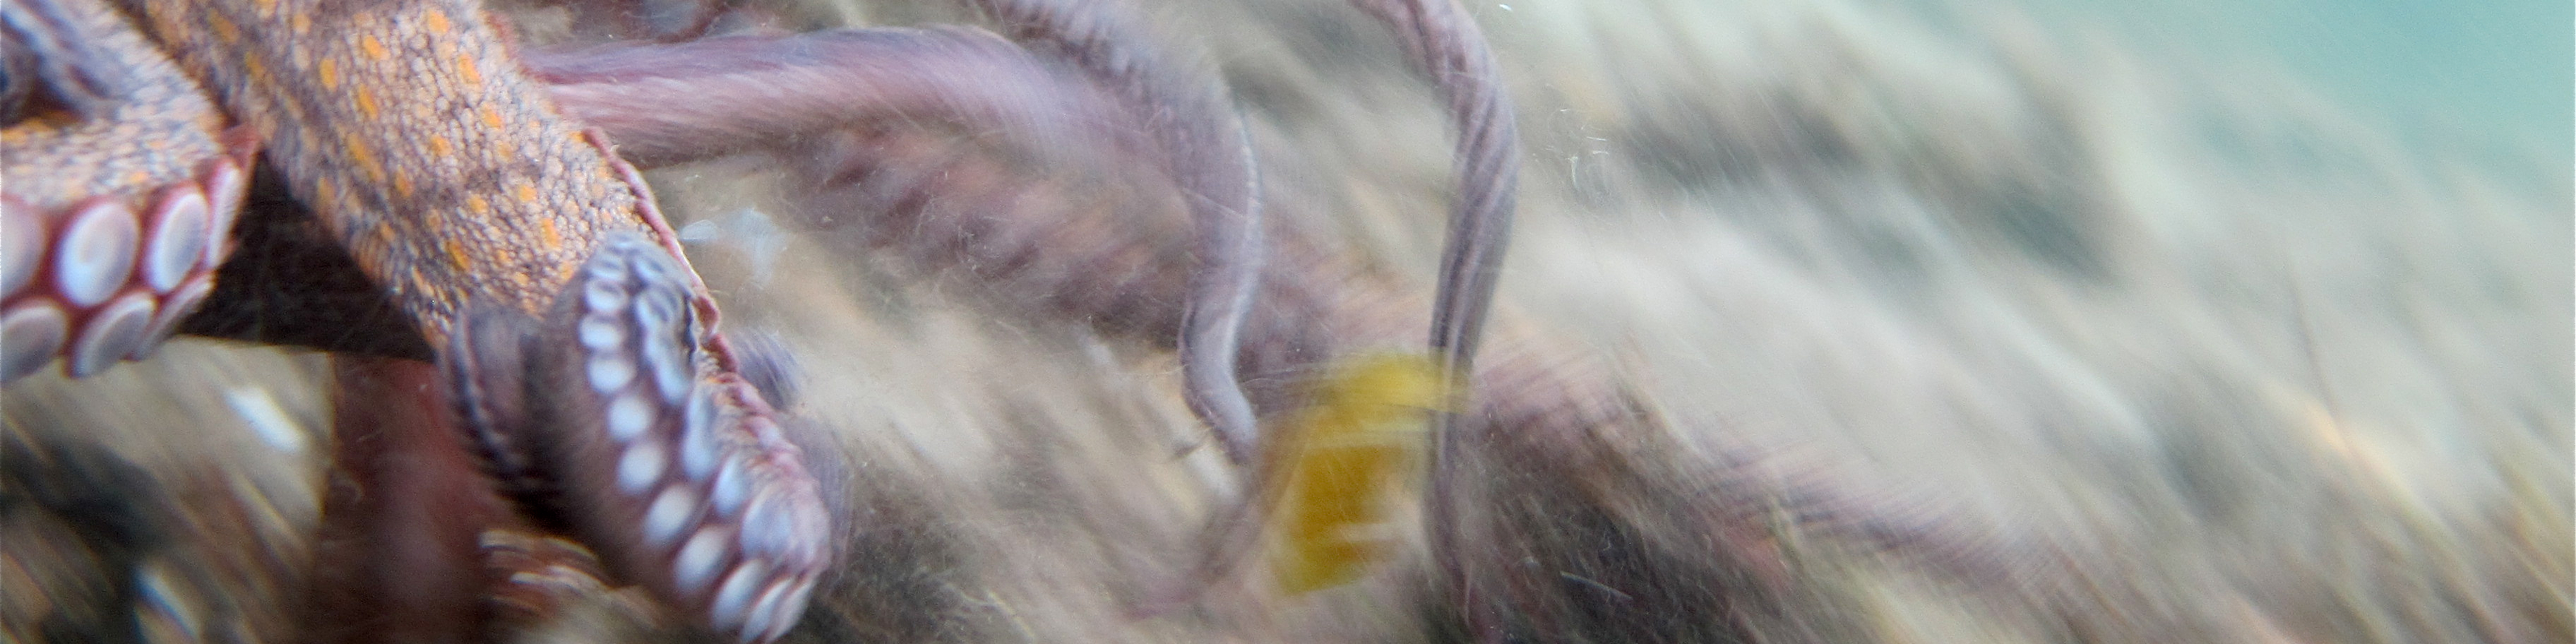 Photo of gloomy octopus tentacles in motion under water